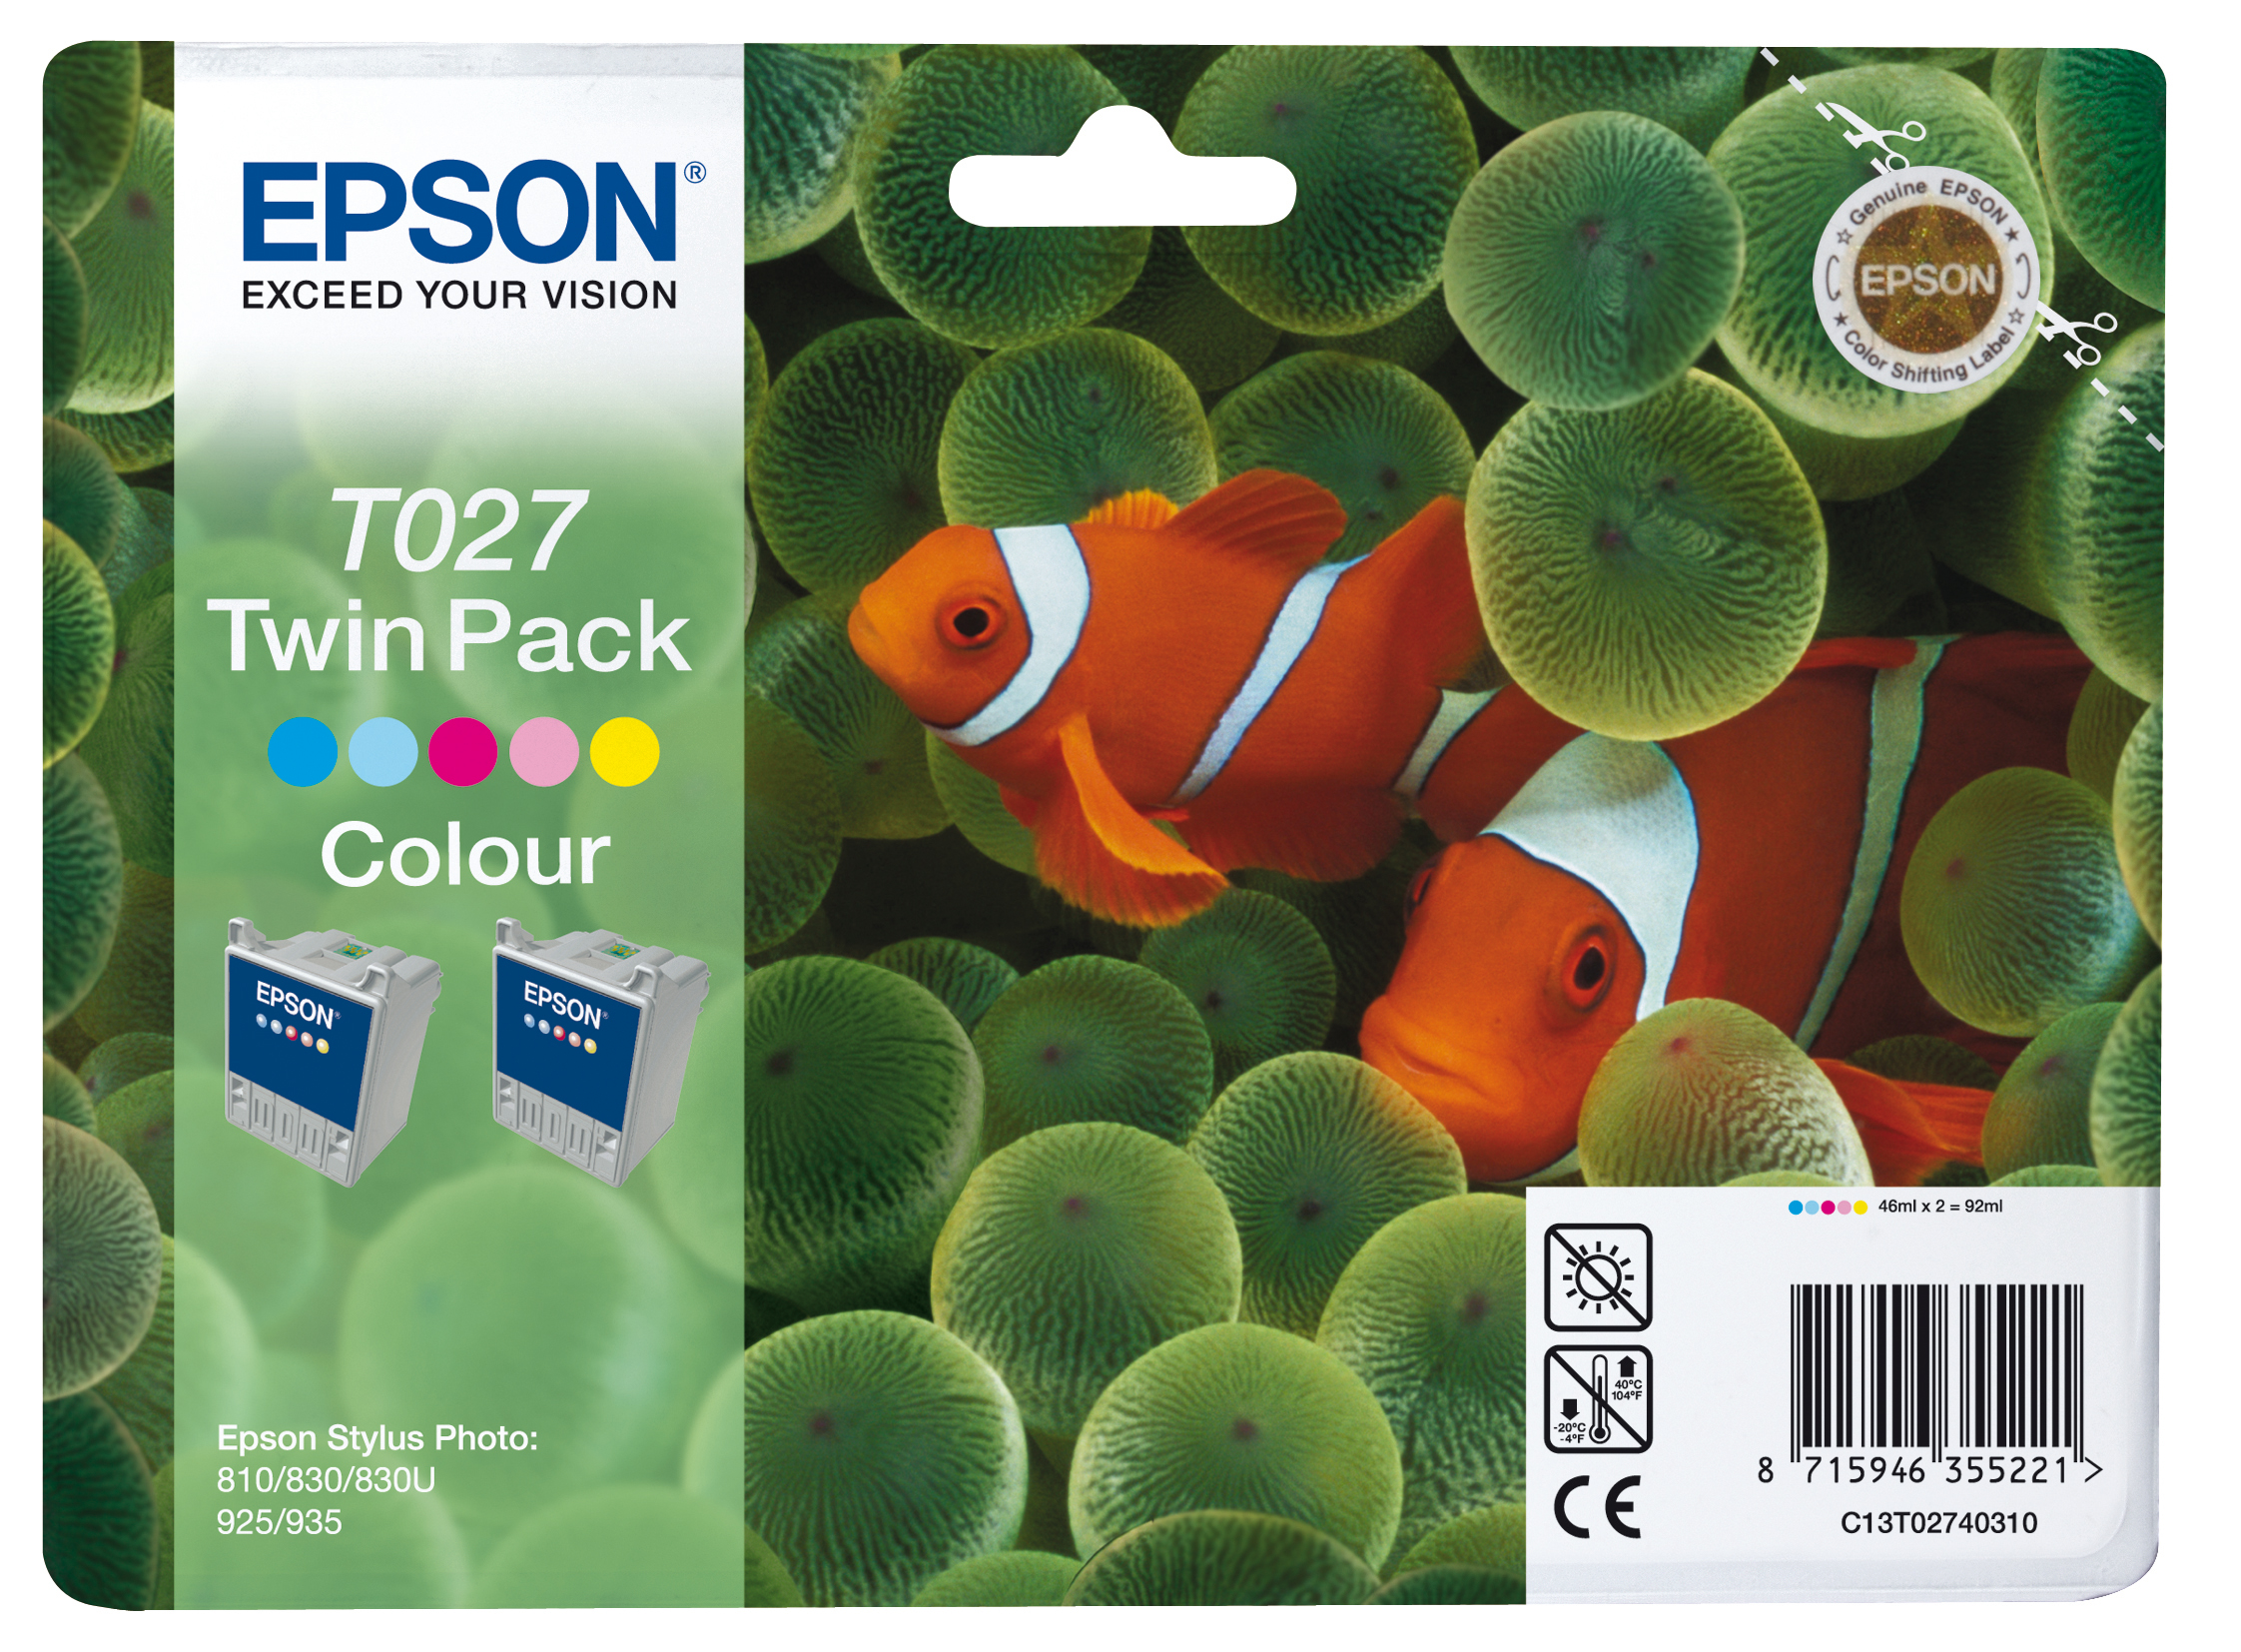 Twinpack T027 2cart Colore 2x T027401 Blister Rs C13t02740310 3781946355221